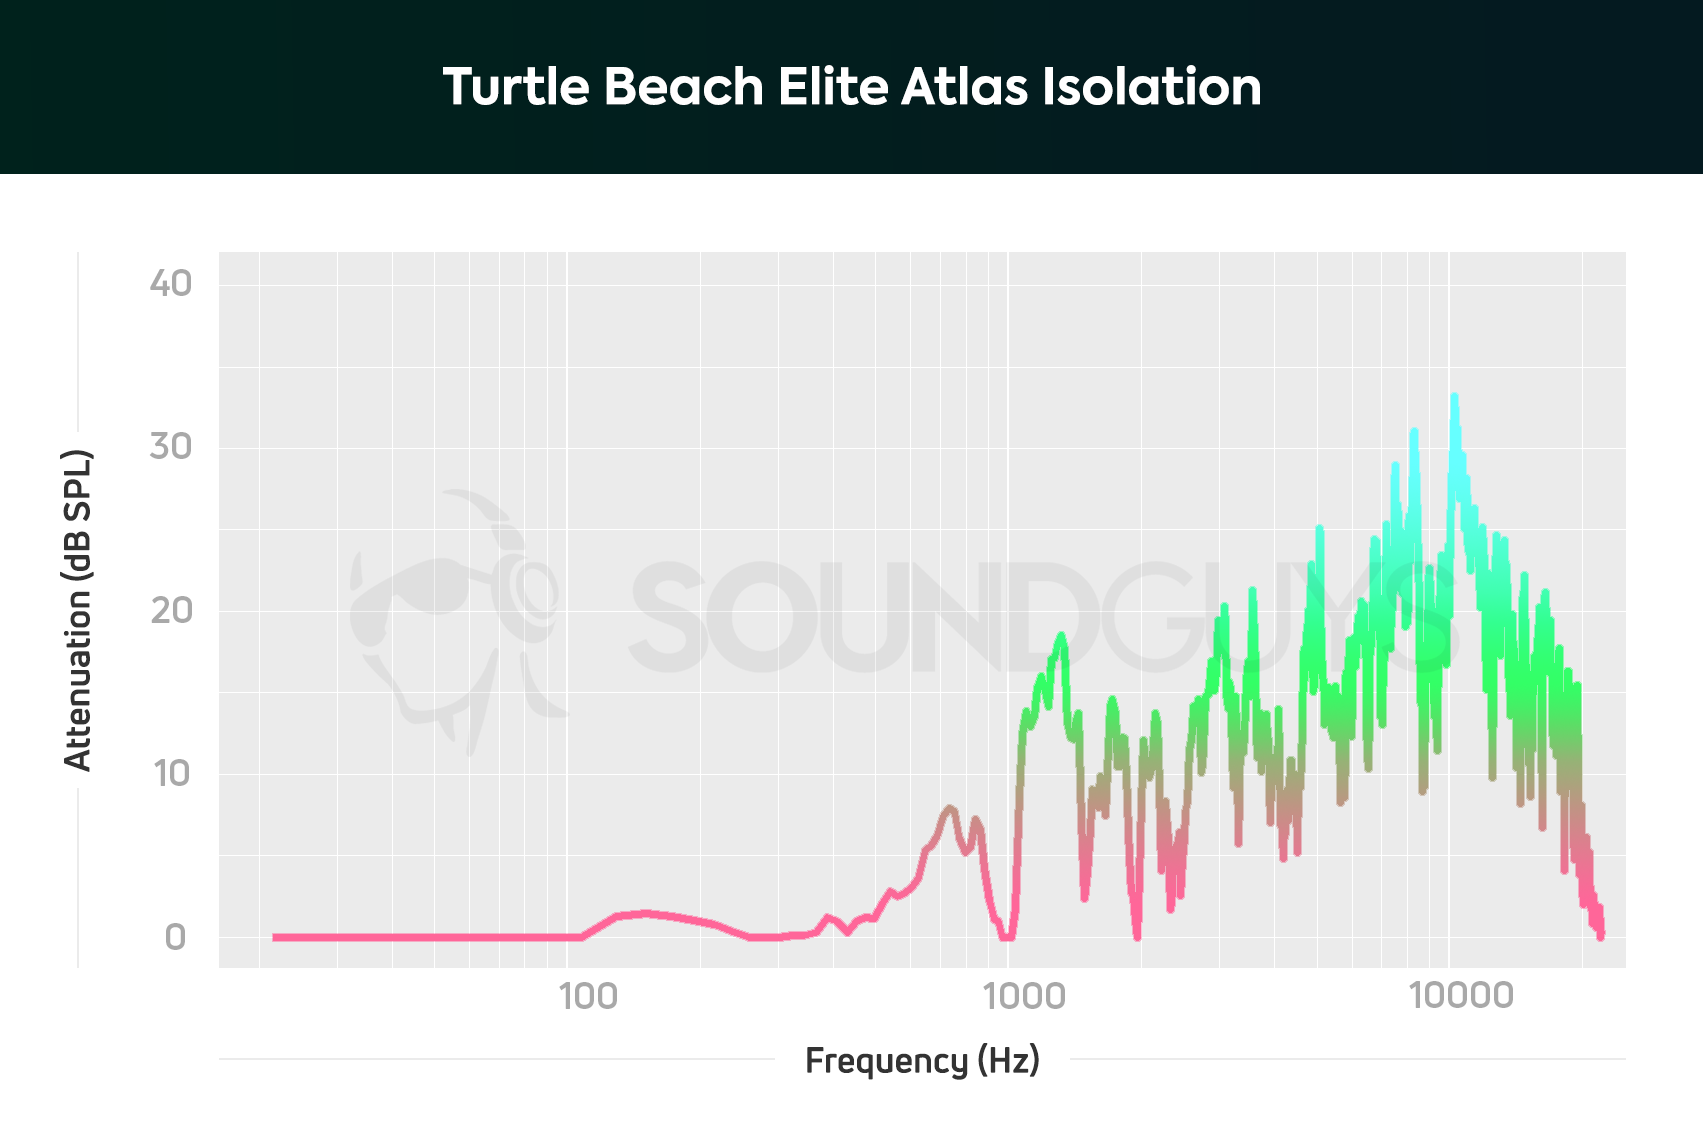 An isolation chart for The Turtle Beach Elite Atlas gaming headset, which shows low levels of attenuation pretty much across the board.